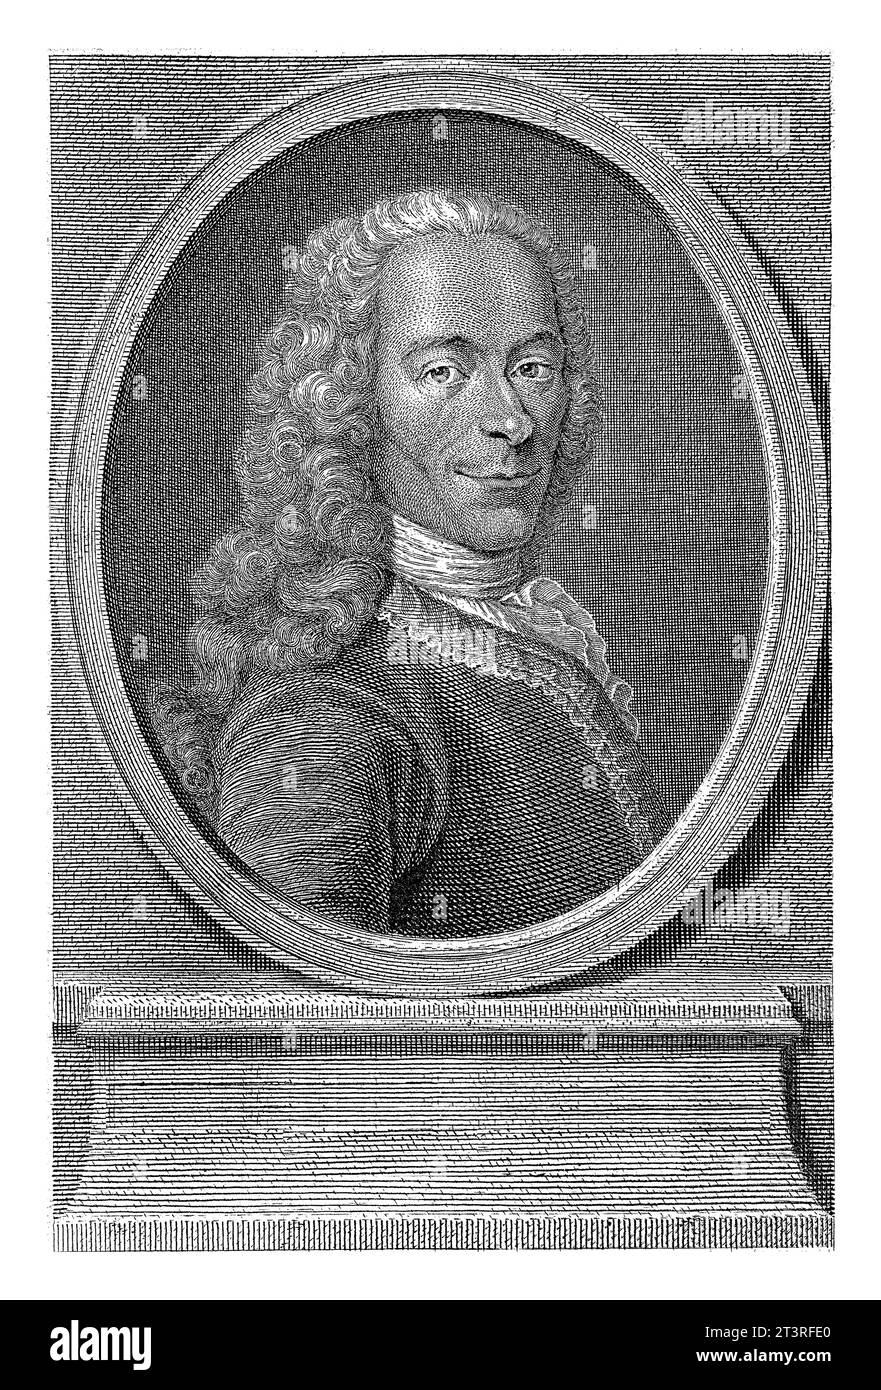 Portrait of Voltaire, Jacob Folkema, 1702 - 1767 Portrait bust in oval to the right of the French writer Voltaire, bareheaded. Stock Photo